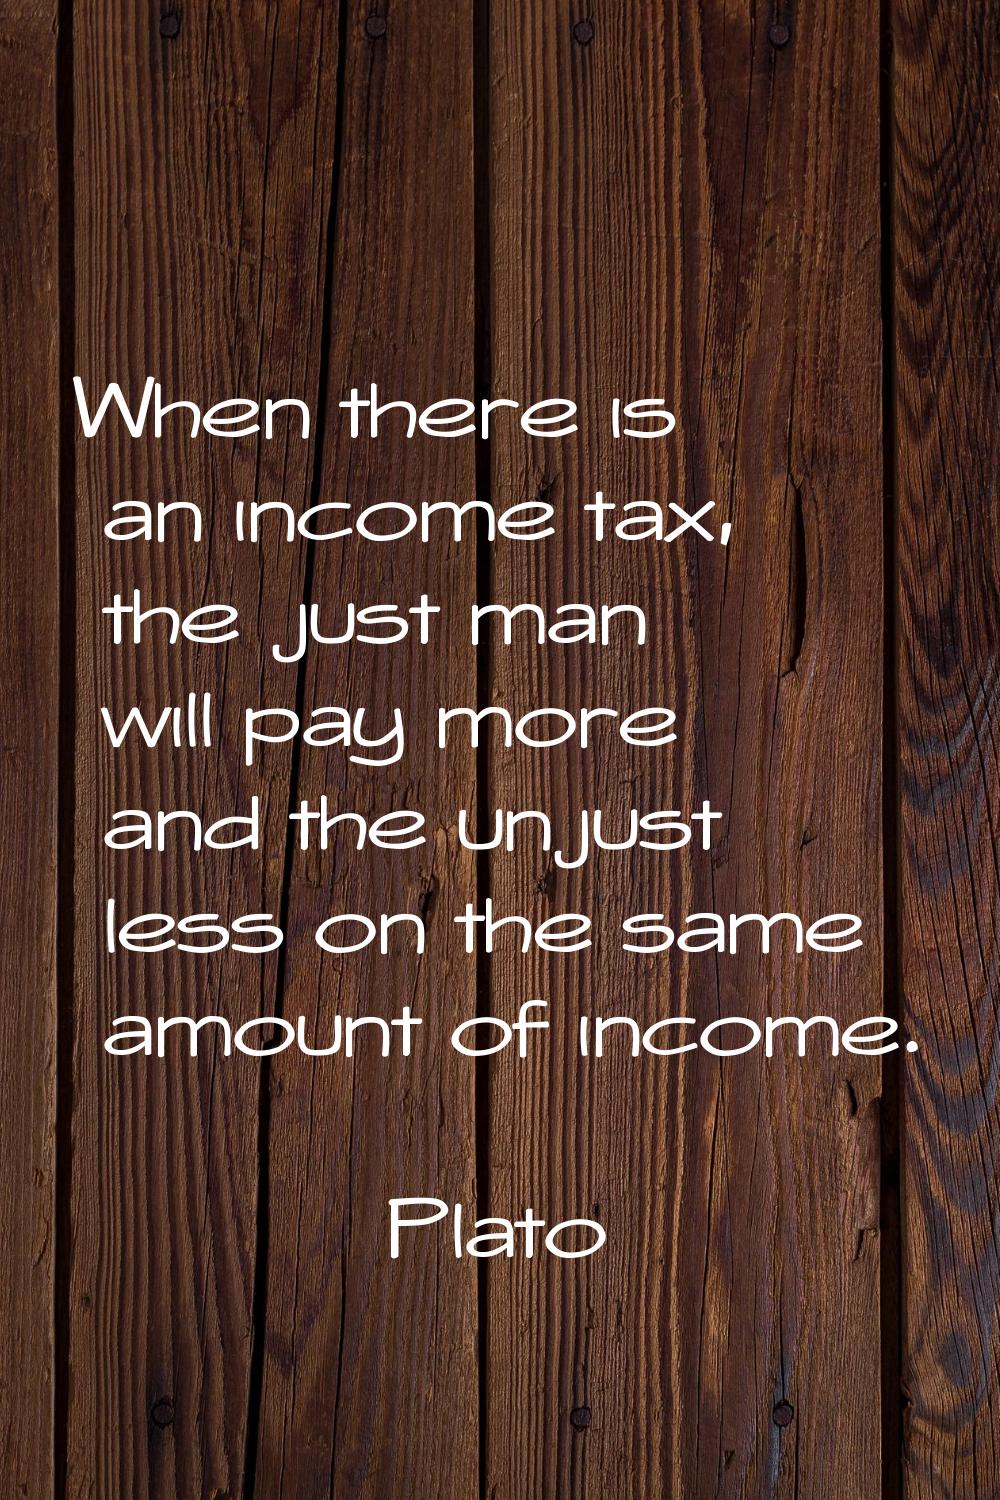 When there is an income tax, the just man will pay more and the unjust less on the same amount of i